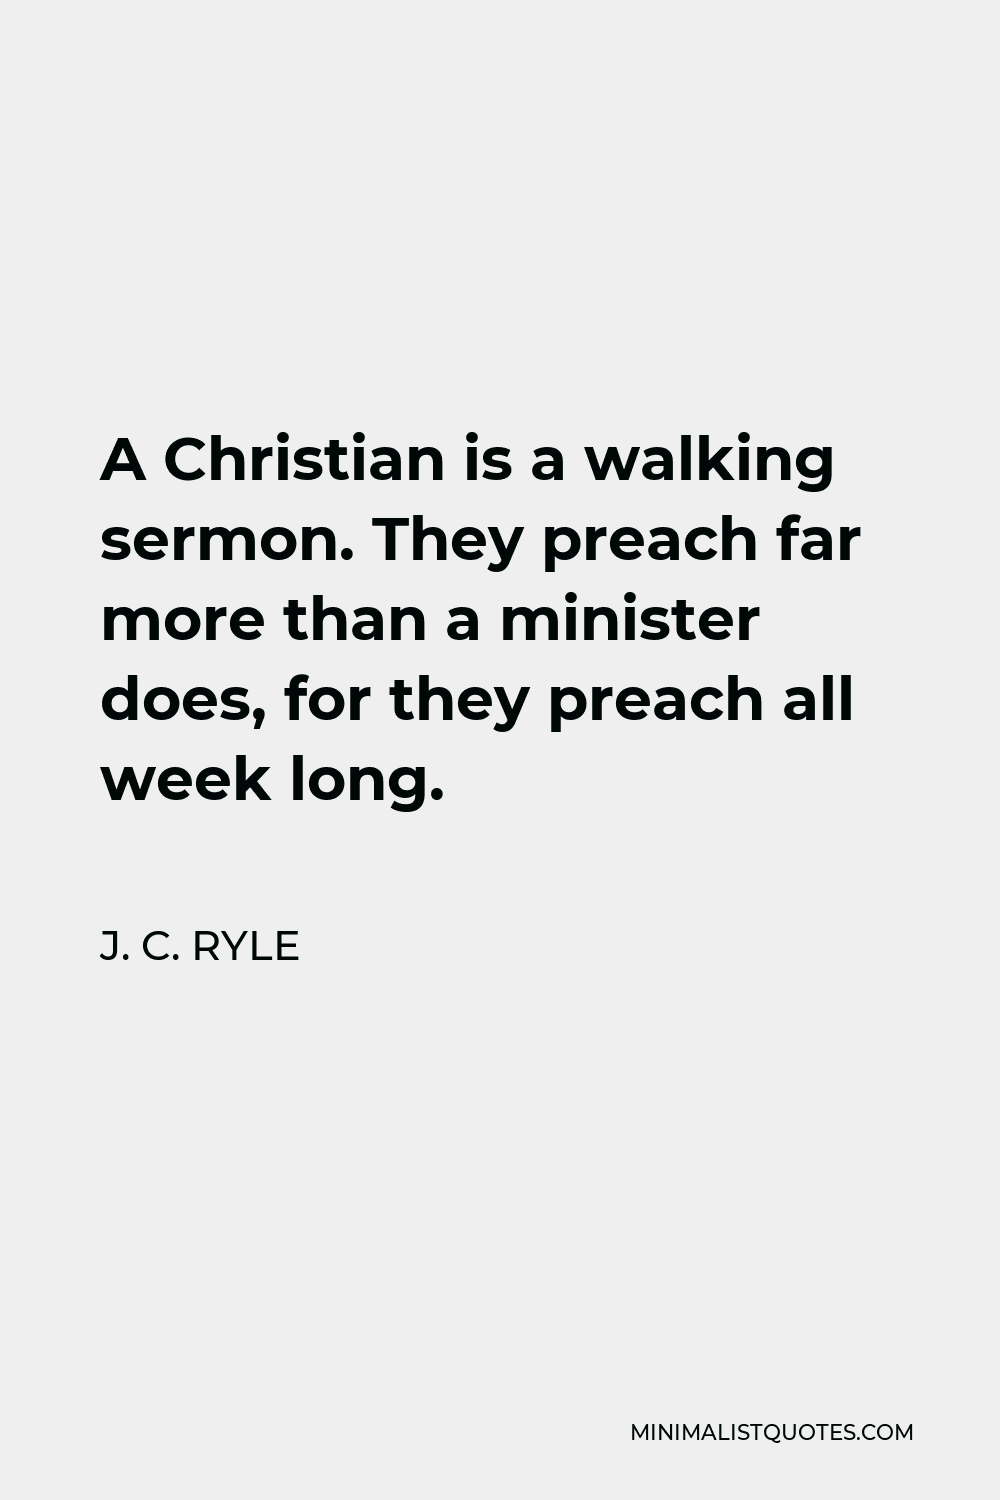 J. C. Ryle Quote - A Christian is a walking sermon. They preach far more than a minister does, for they preach all week long.